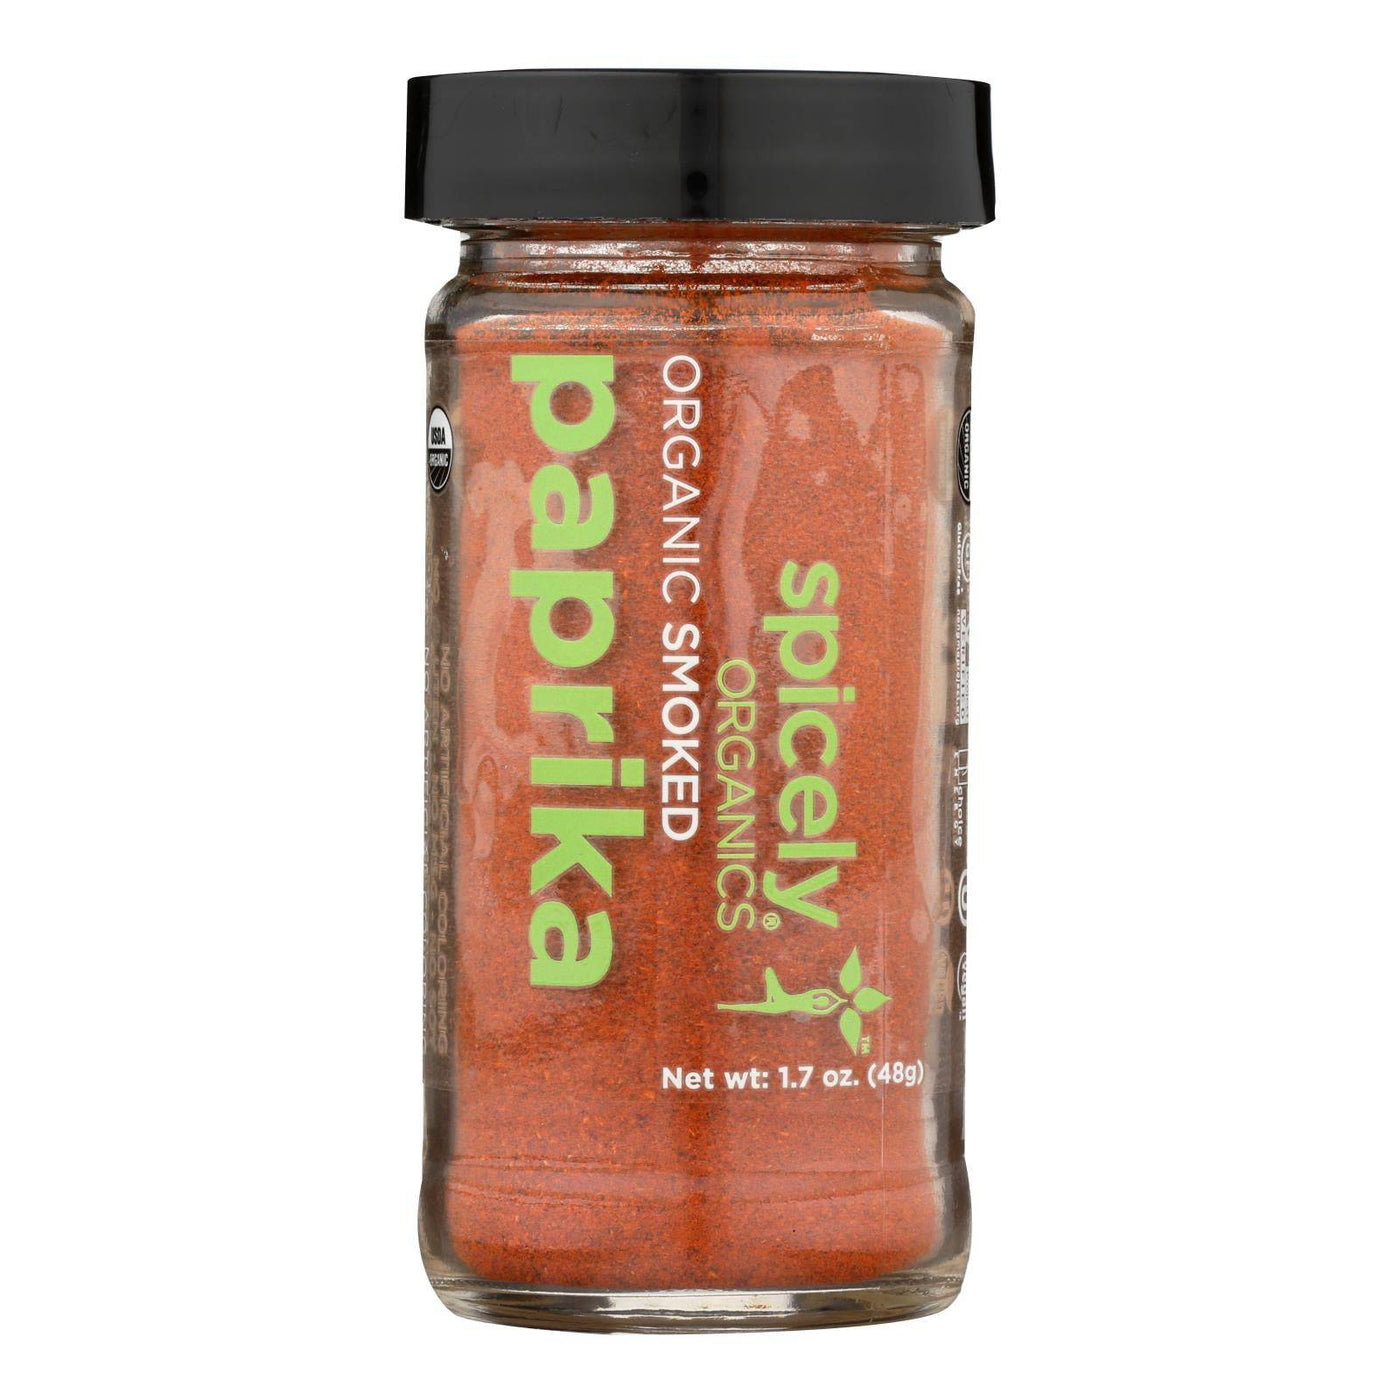 Spicely Organics - Organic Paprika - Smoked - Case Of 3 - 1.7 Oz. | OnlyNaturals.us